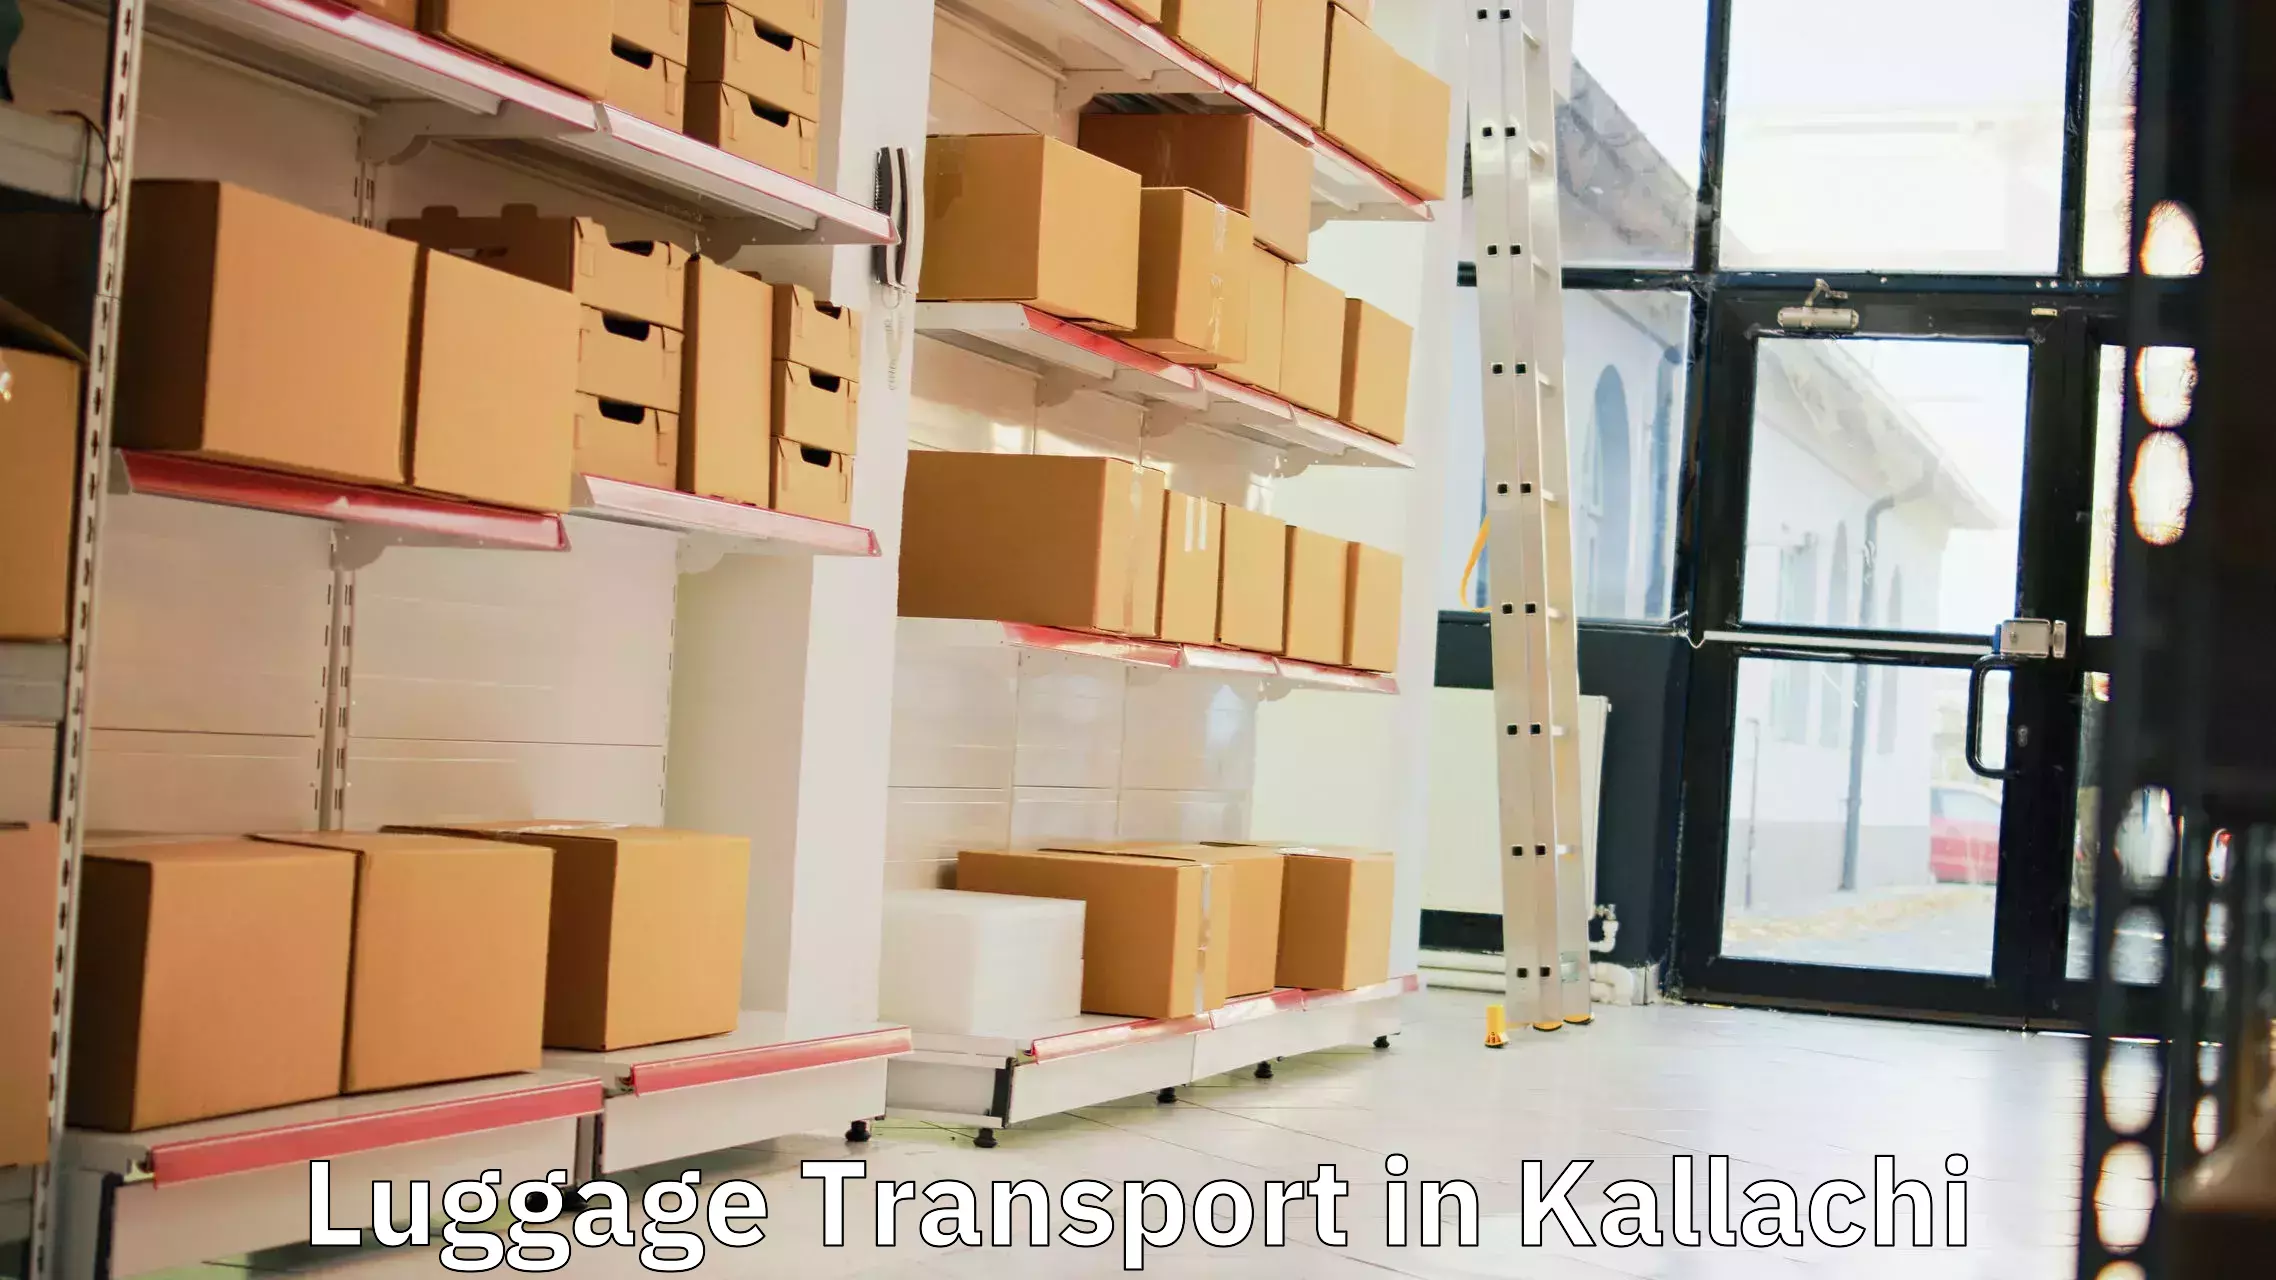 Luggage delivery optimization in Kallachi